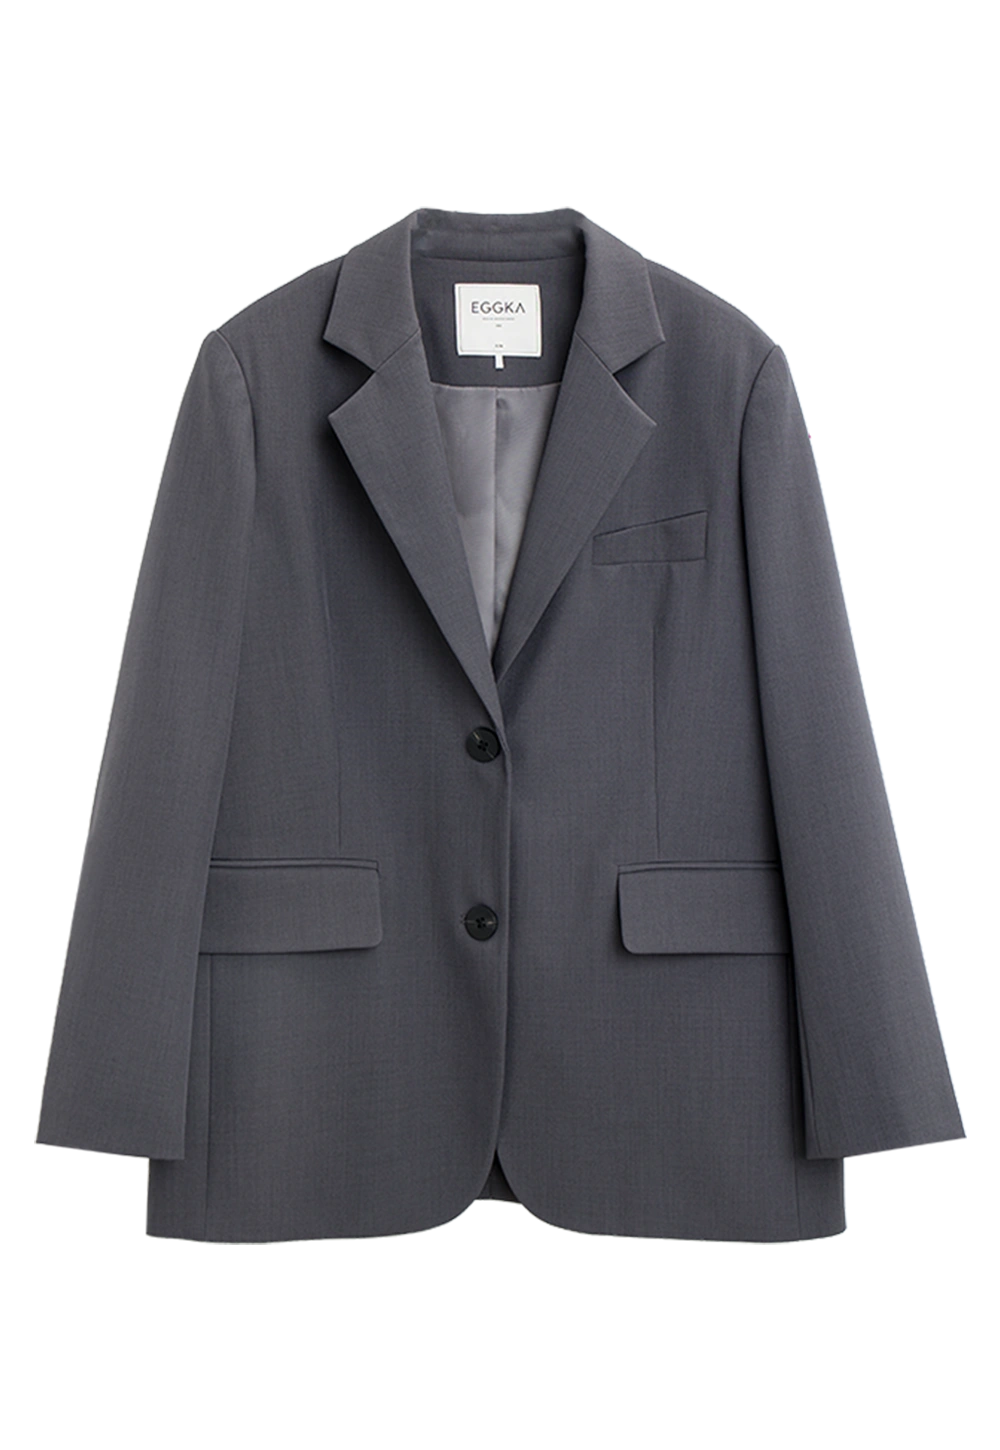 Women's Classic Grey Blazer - Single-Breasted with Notched Lapels